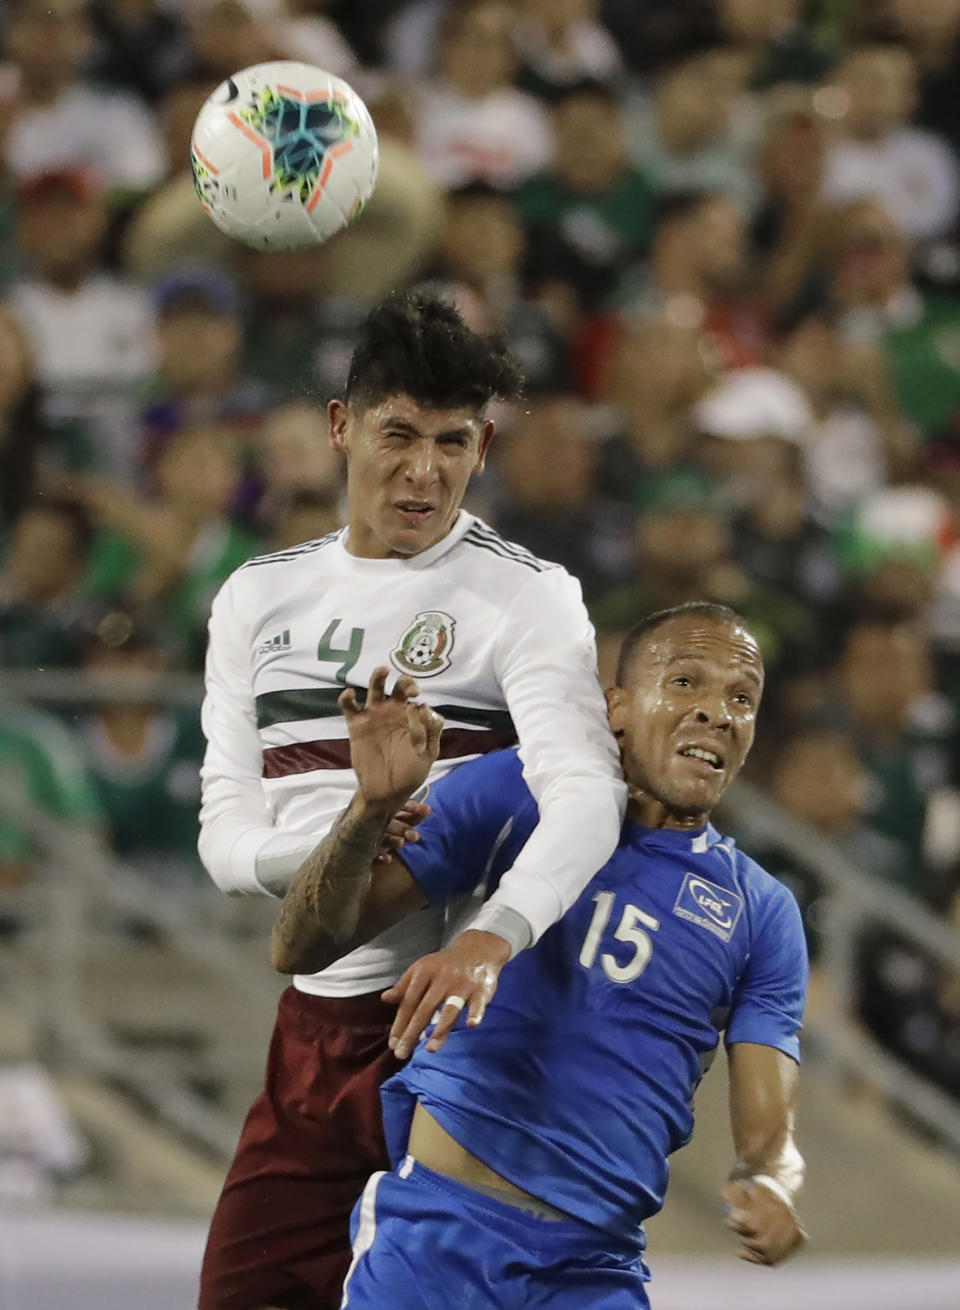 Martinique's Audrick Linord (15) is fouled by Mexico's Edson Alvarez (4) during the first half of their CONCACAF Golf Cup soccer match in Charlotte, N.C., Sunday, June 23, 2019. (AP Photo/Chuck Burton)